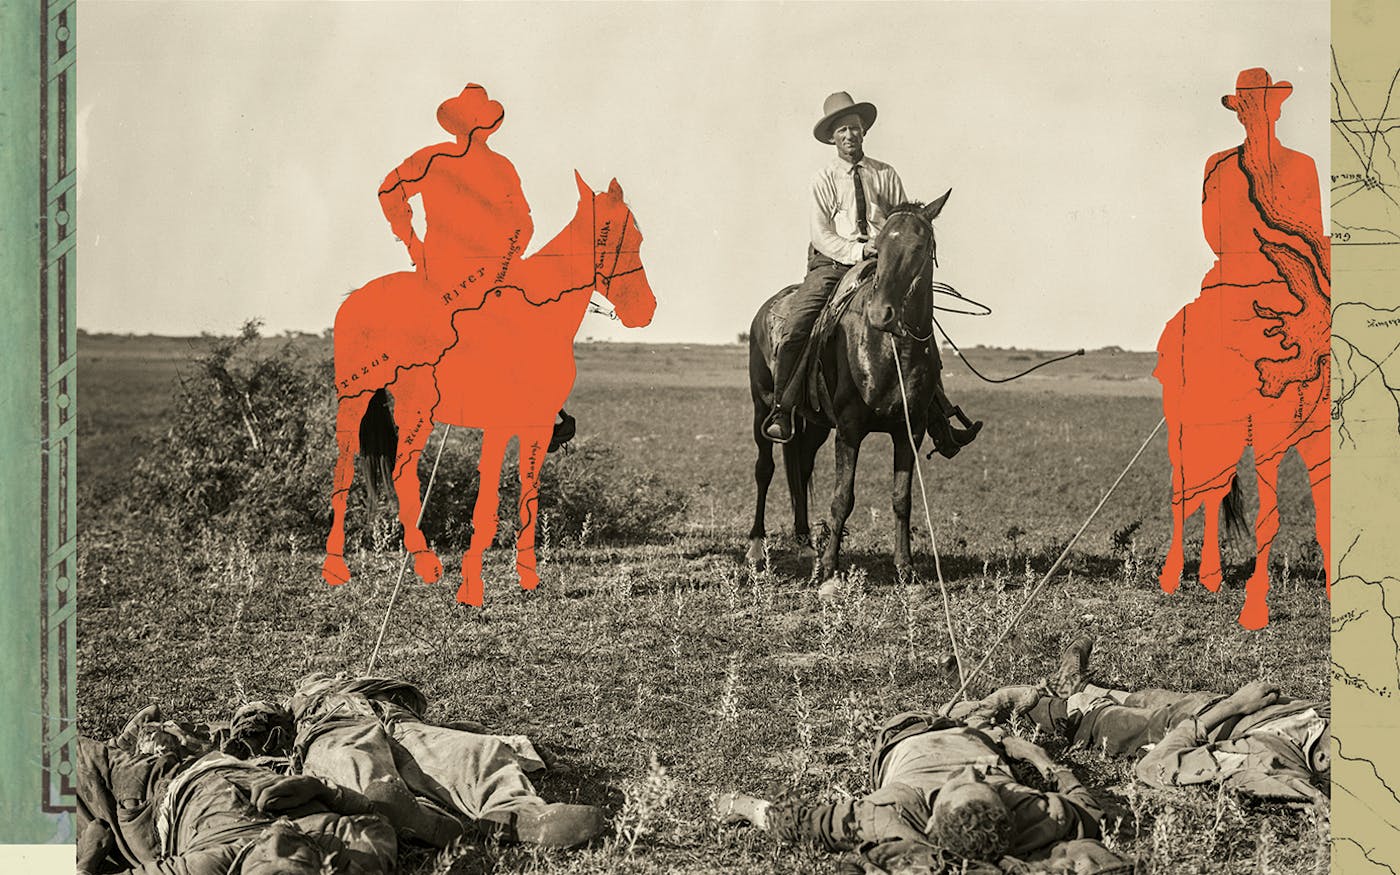 Biography gives an eye-opening look at the Texas Ranger who killed